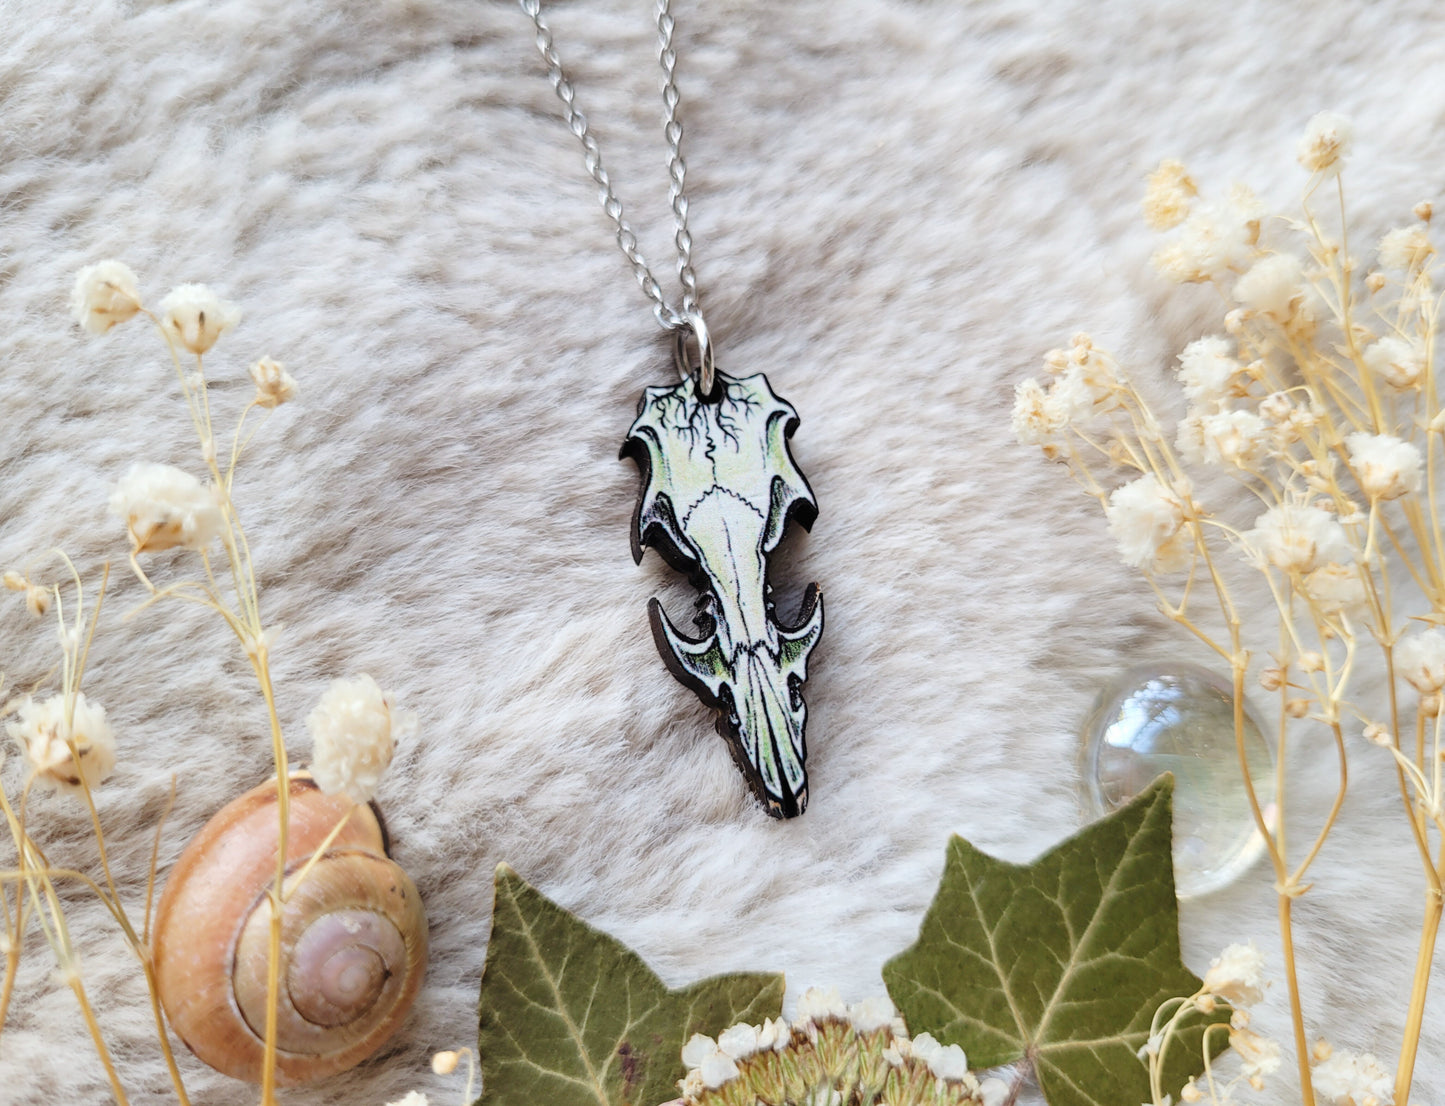 Rat Skull Illustrated necklace, responsibly sourced cherry wood, chain options available, by Grace Moth